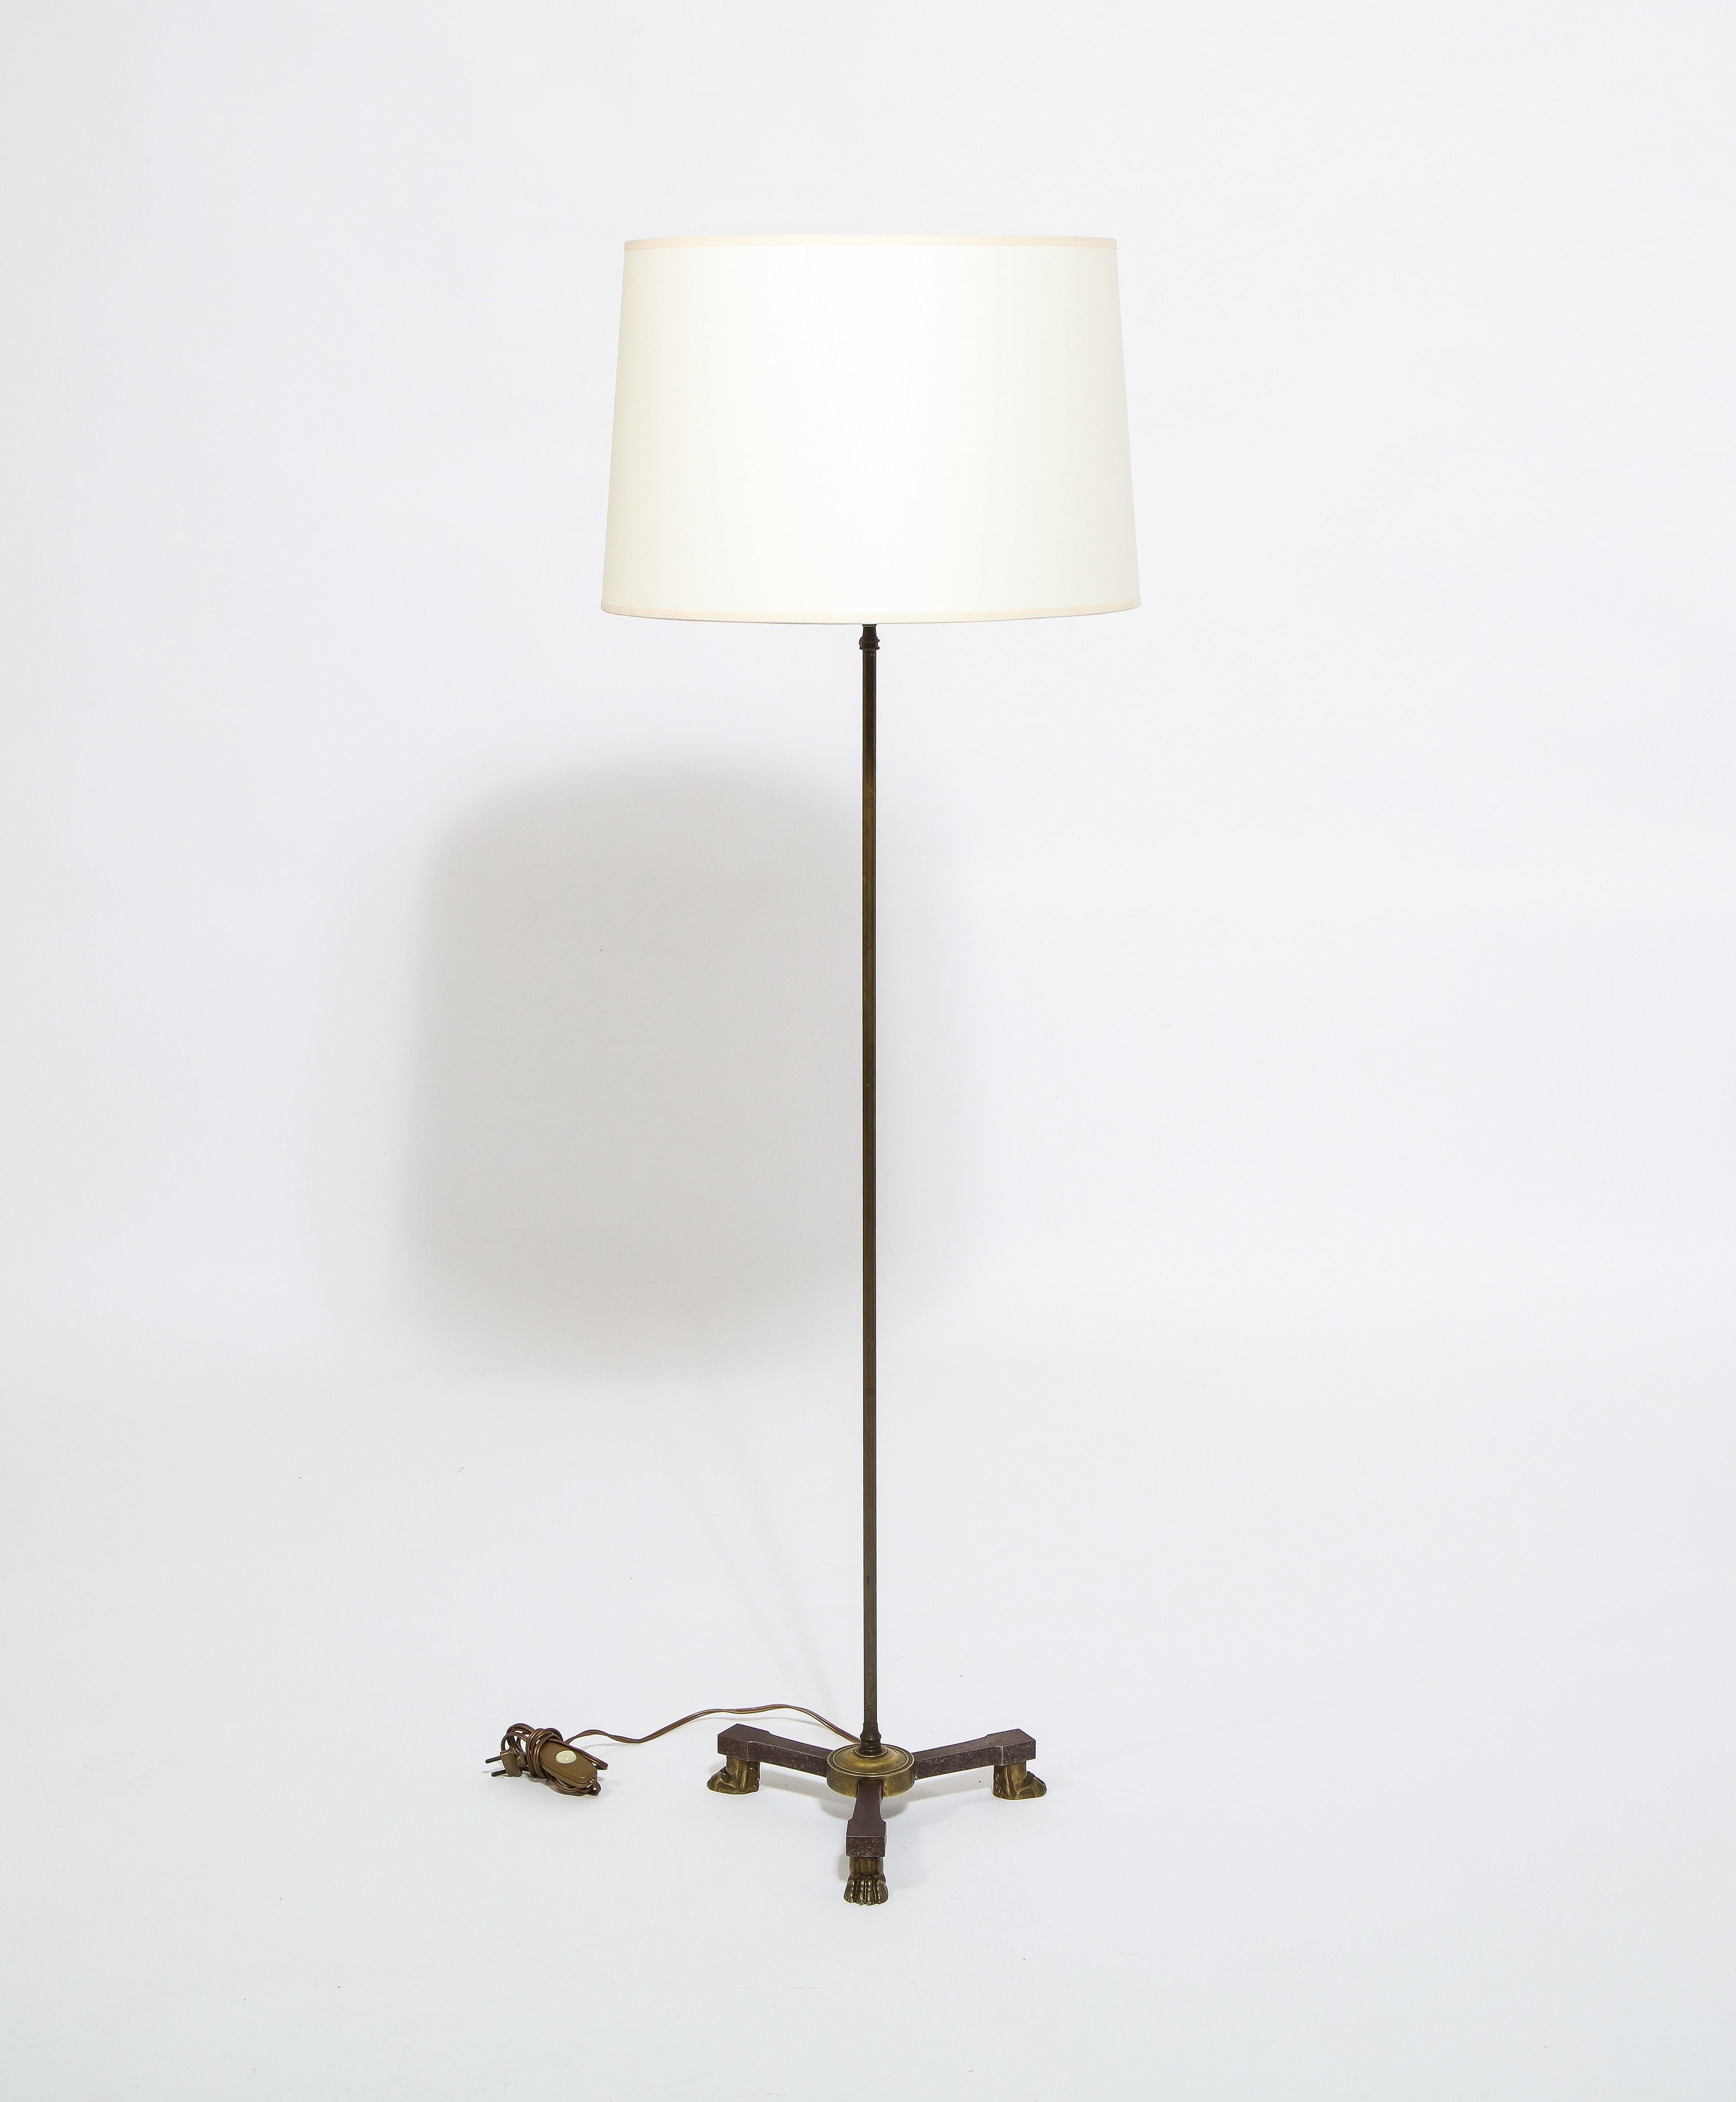 Bronze neoclassical tripod floor lamp by André Arbus. Lion feet decor.
Height can be adjusted from 45